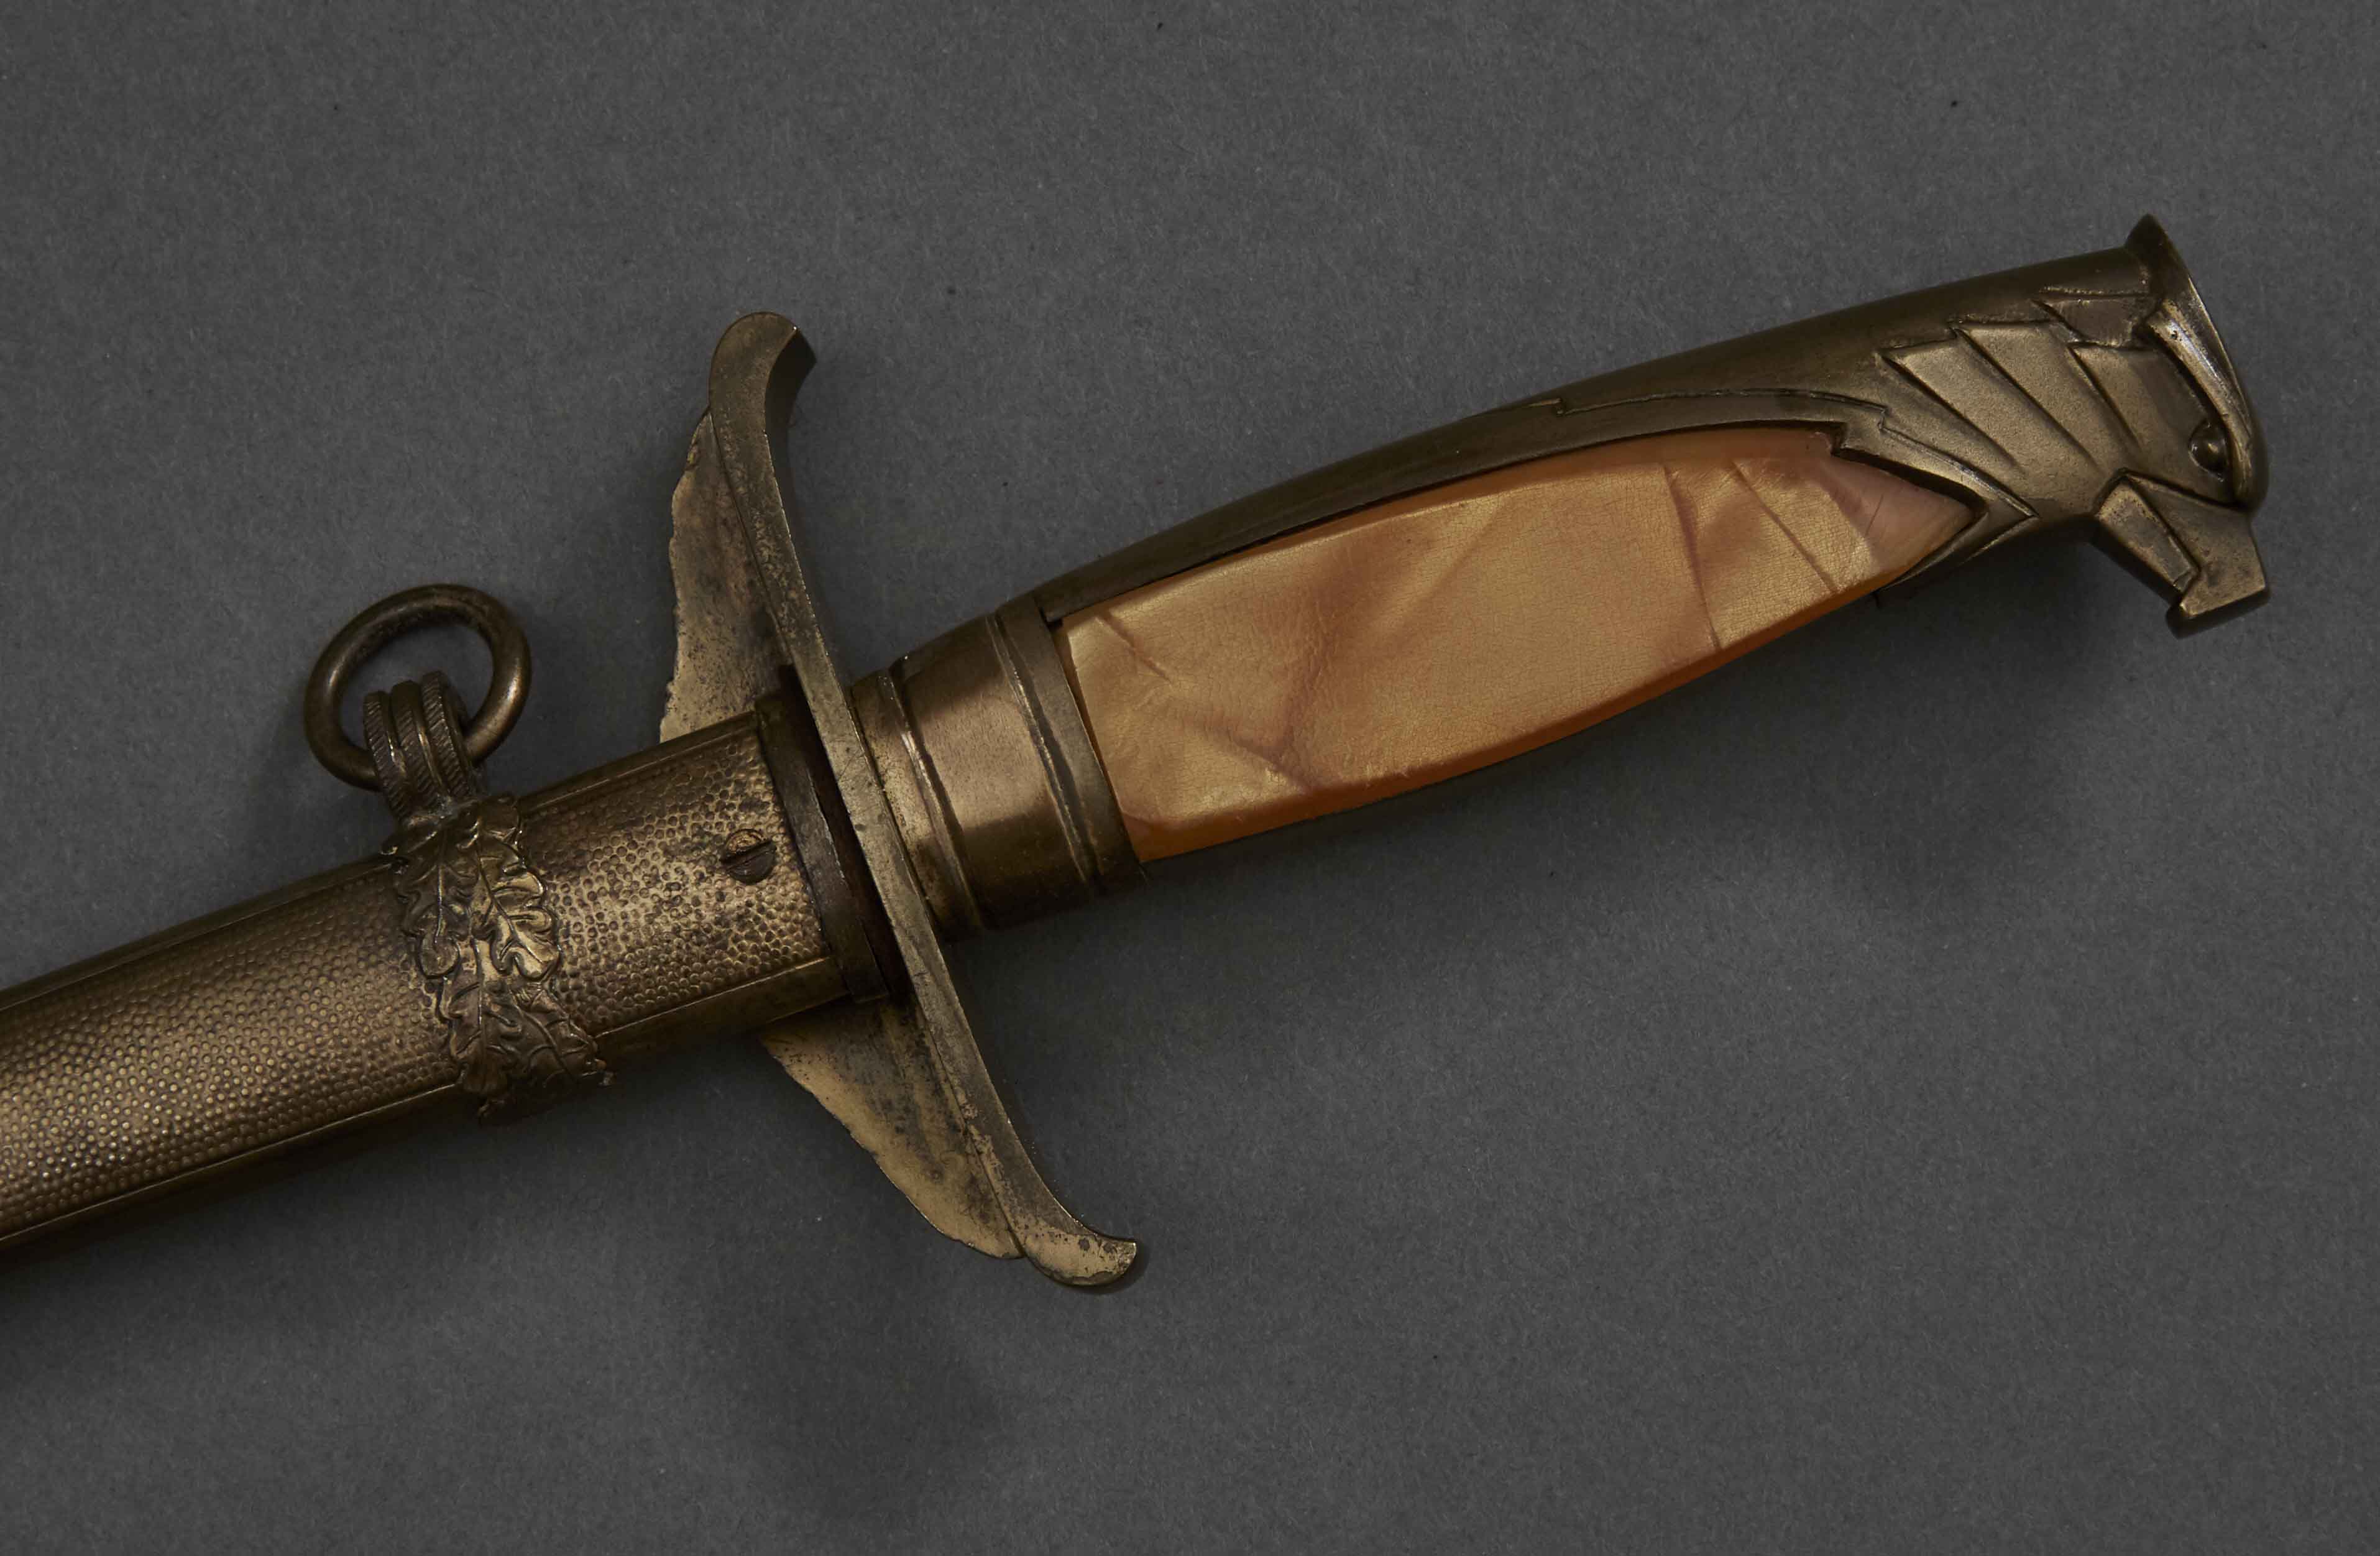 Eastern Territory Gold Government Official Dagger 